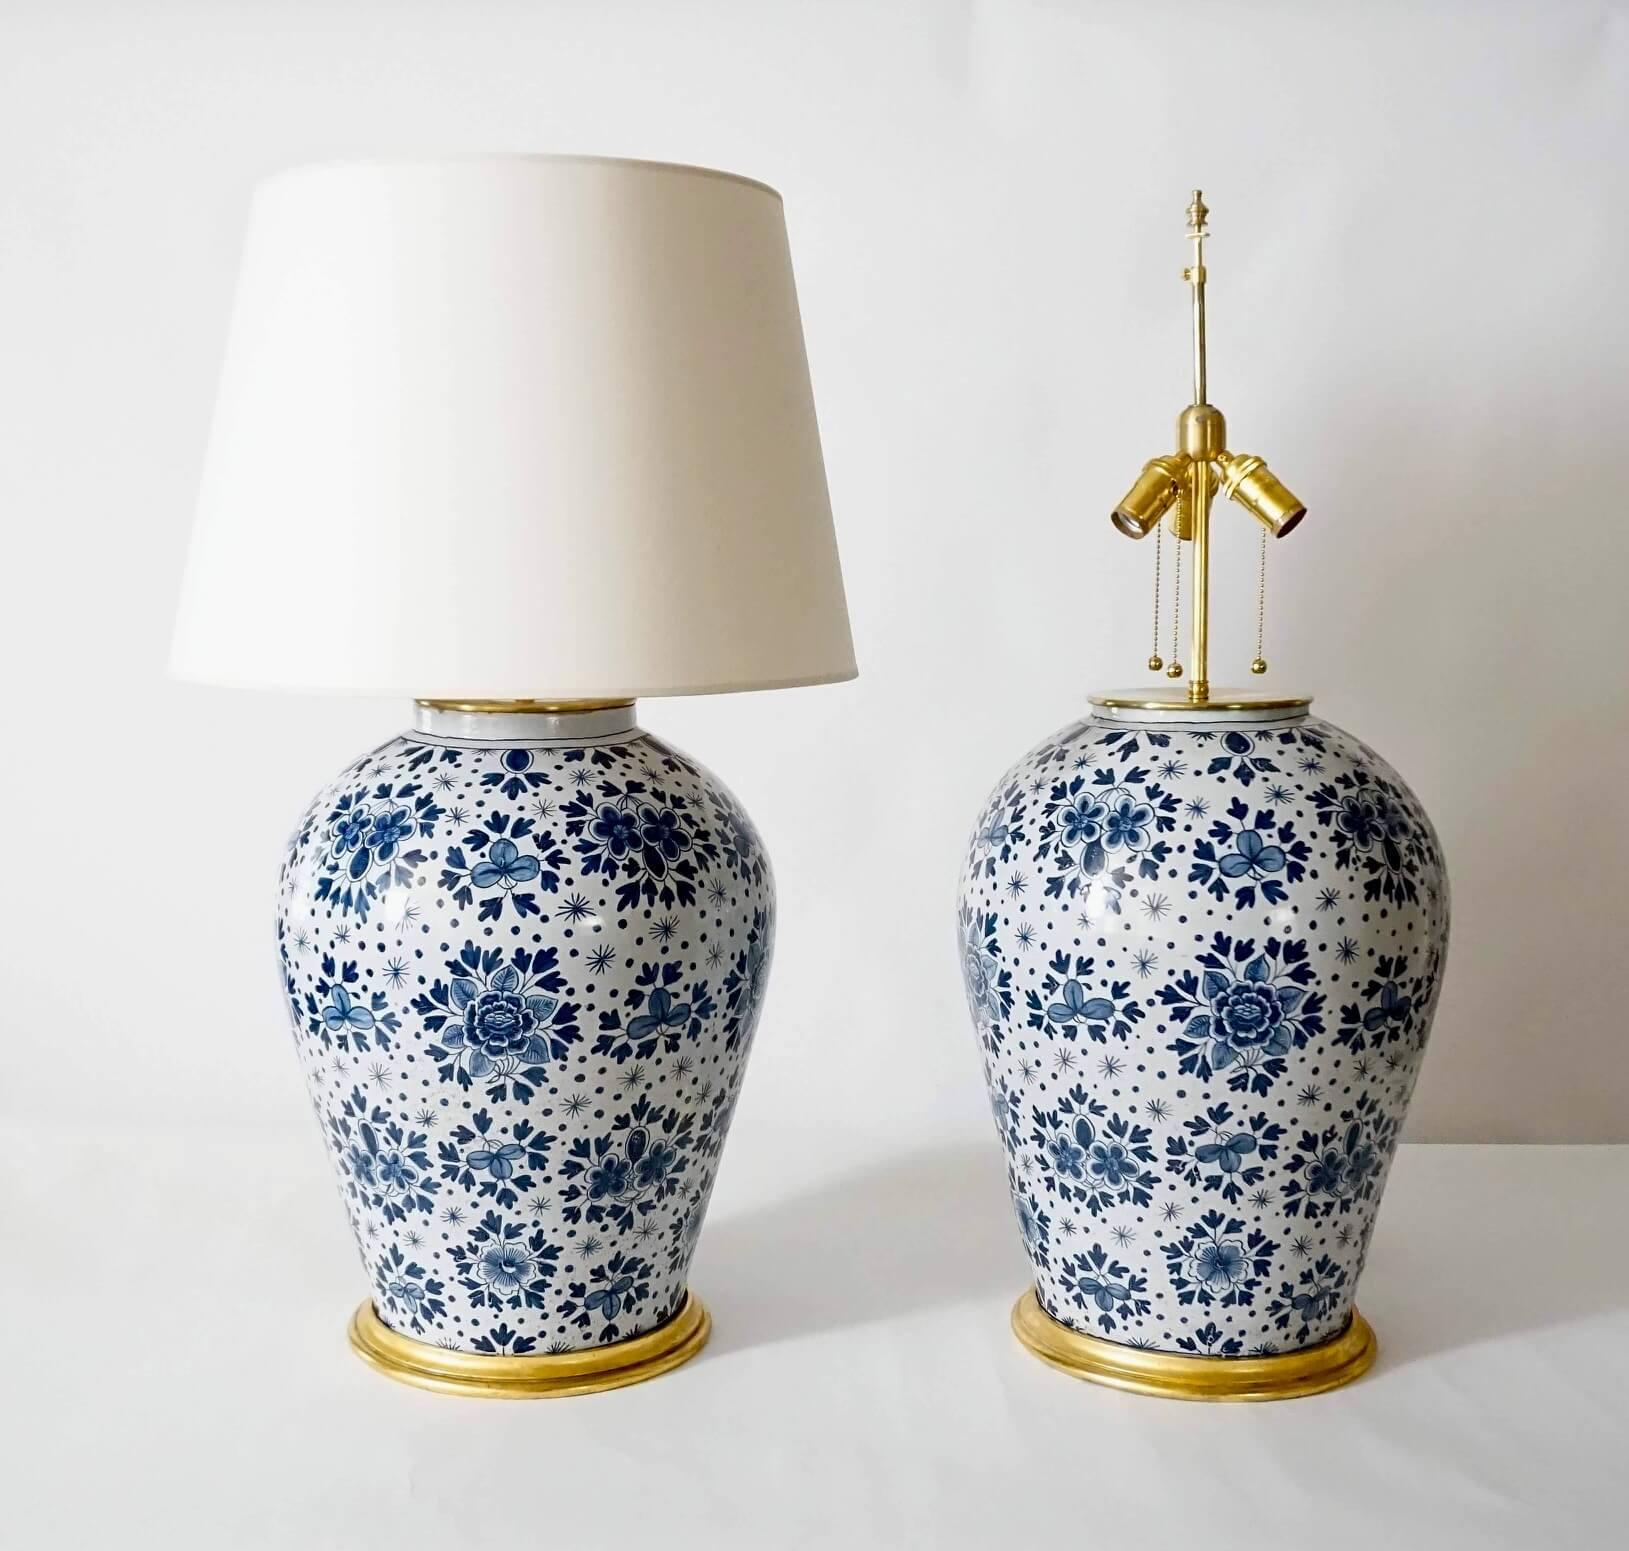 A wonderful, rare, and massively scaled pair of mid-19th century blue-and-white Dutch Delft pottery jar table lamps attributed to the Makkum factory, the thickly potted baluster form vases having allover 'blossom-and-star' pattern painted in blue on